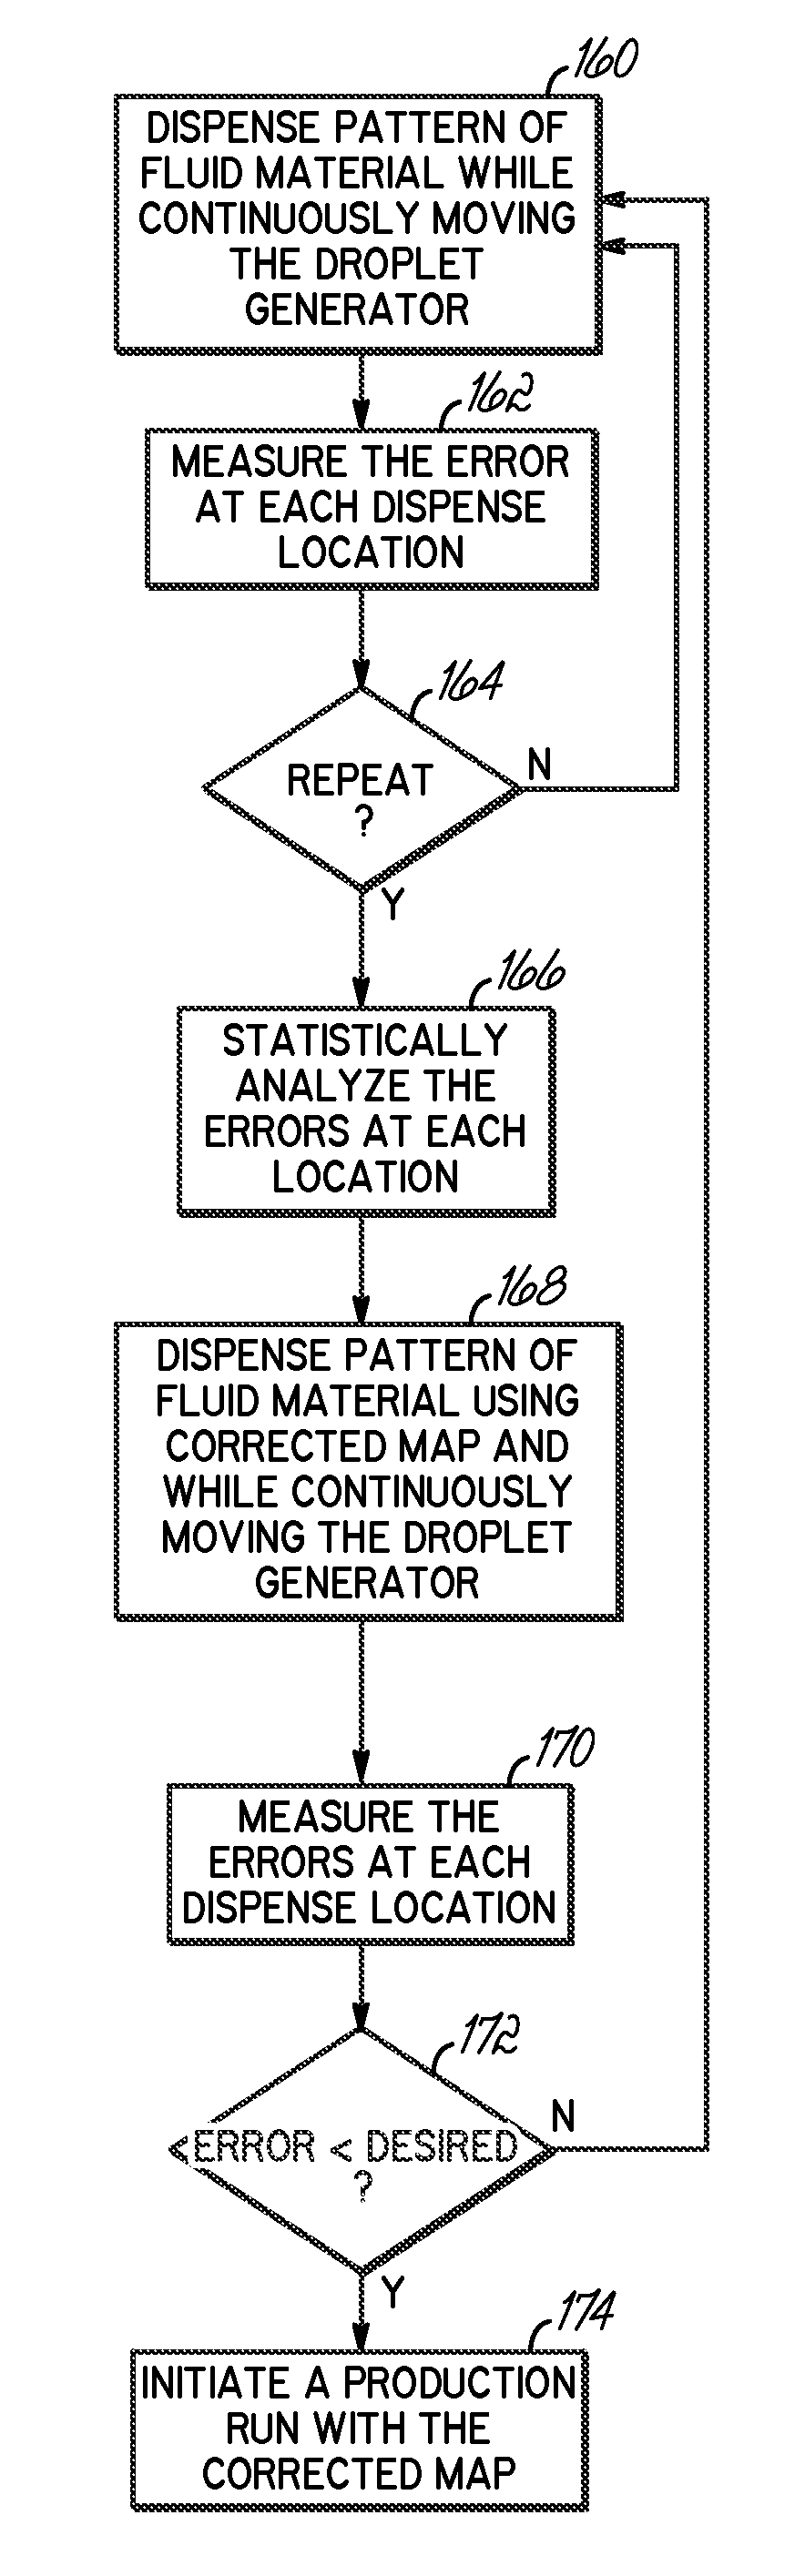 Methods for continuously moving a fluid dispenser while dispensing amounts of a fluid material